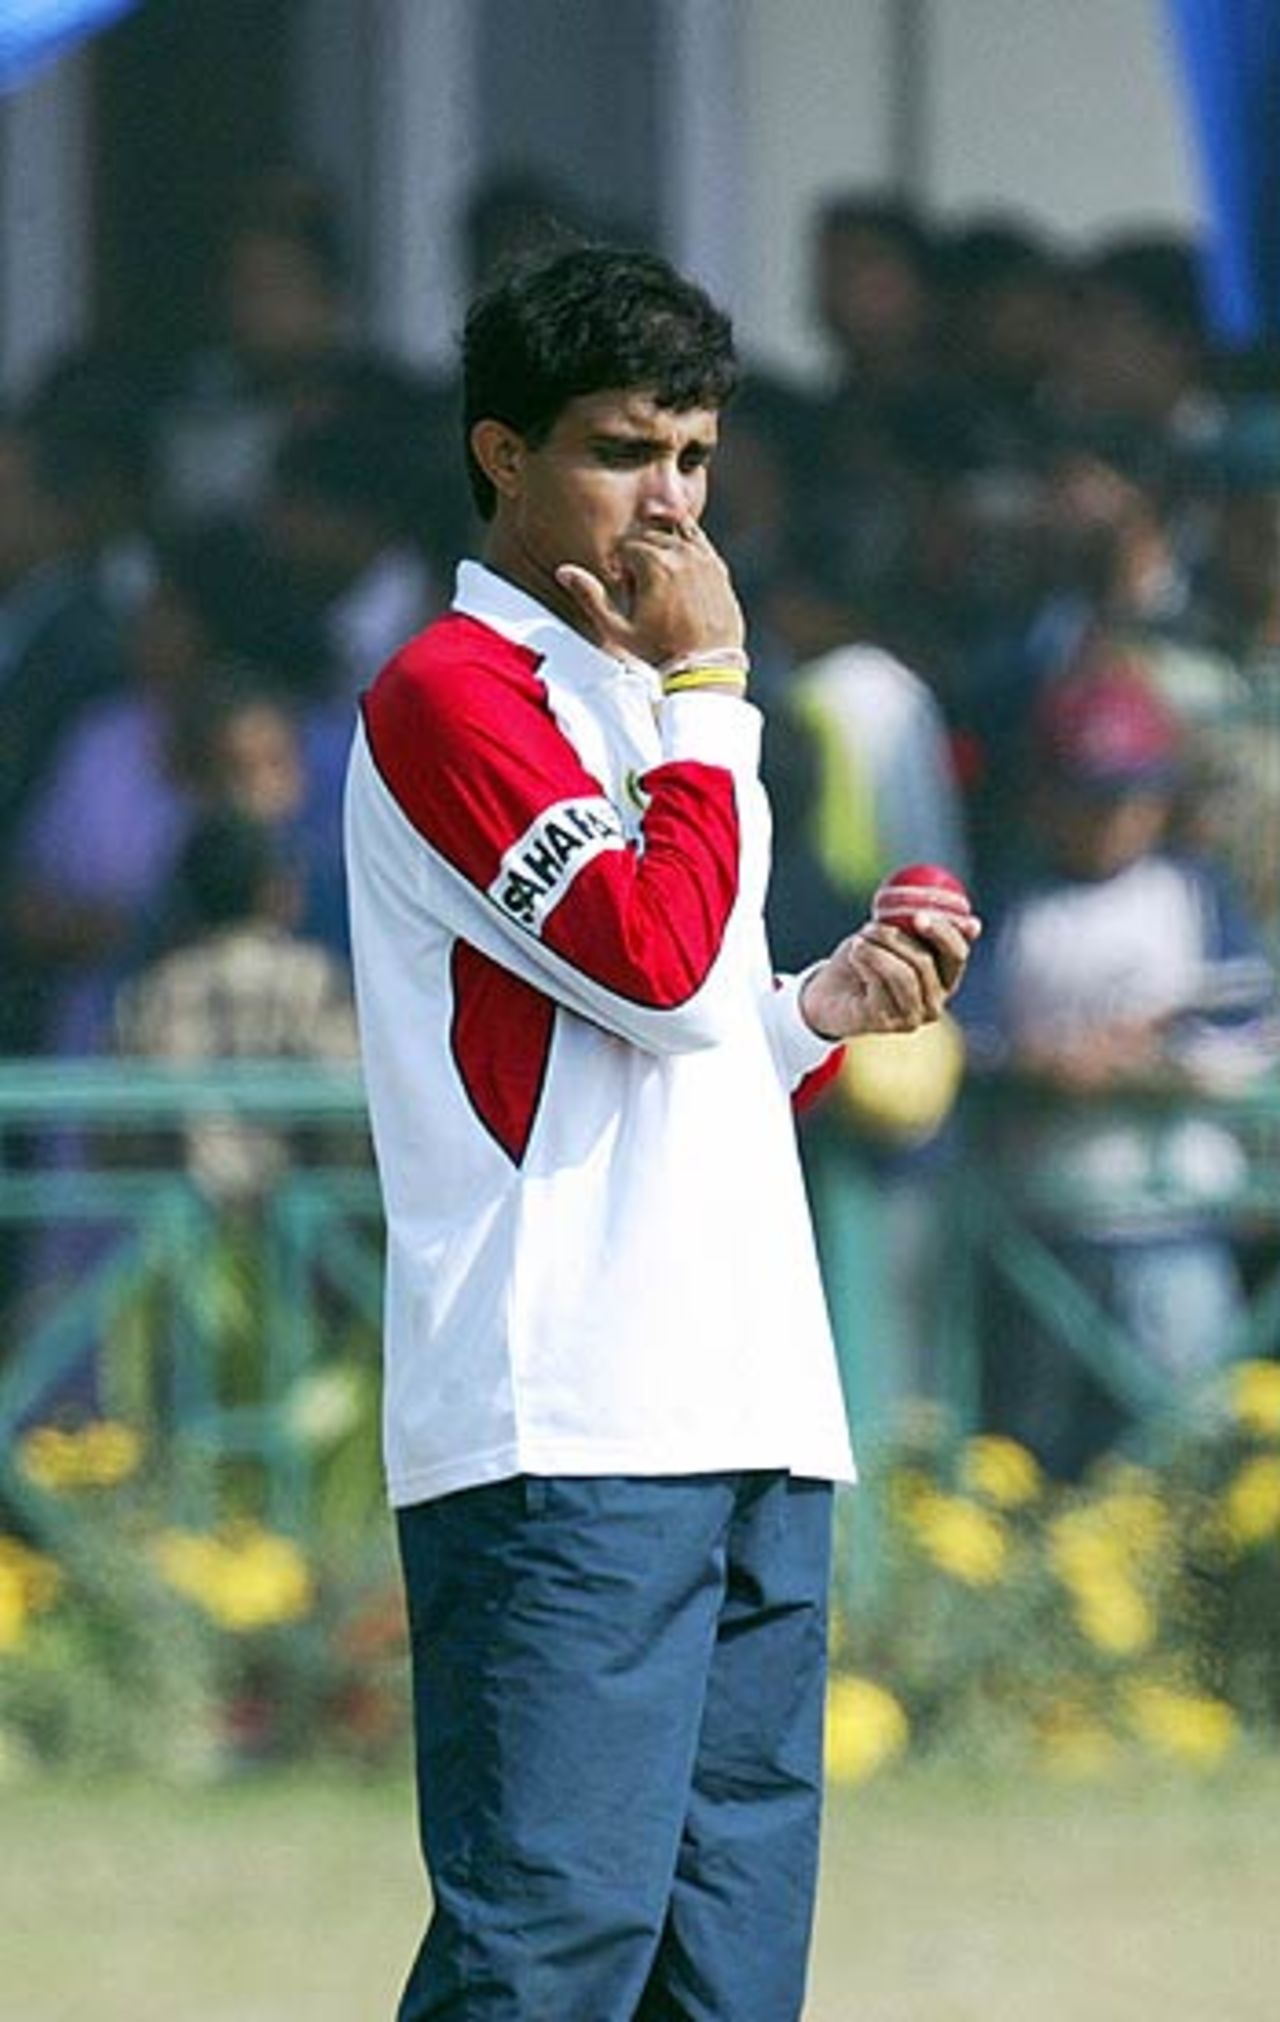 A somewhat pensive Sourav Ganguly in the nets at Delhi ahead of the second Test against Sri Lanka, Delhi, December 9, 2005